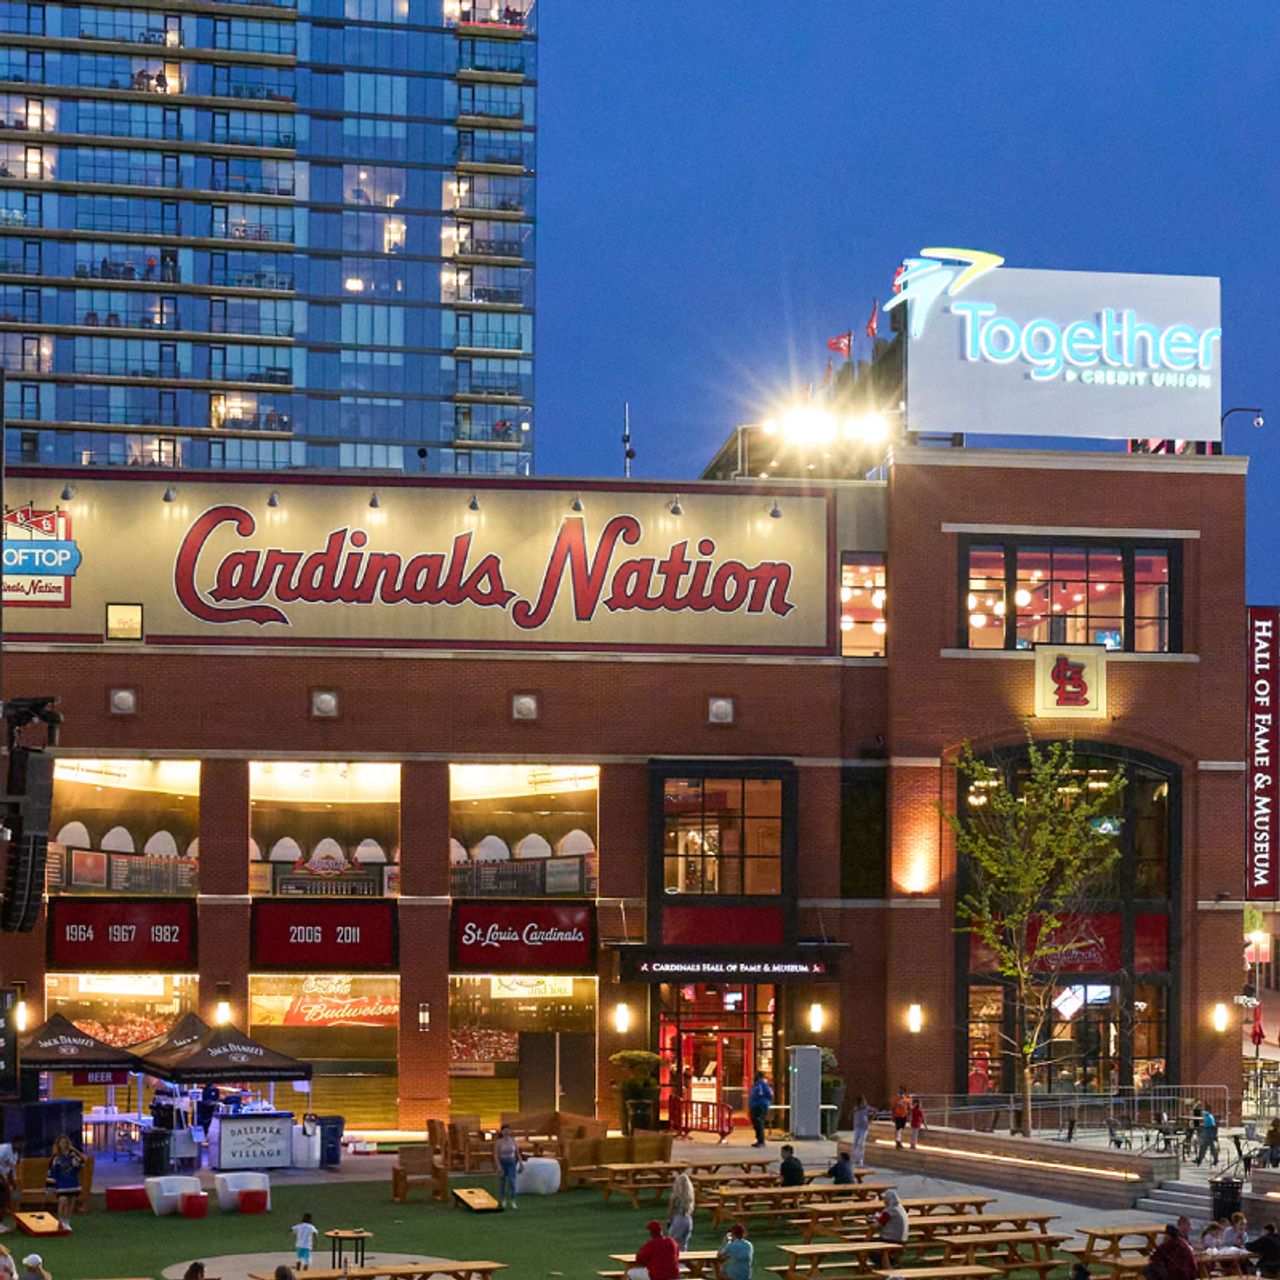 Save BIG on St. Louis Cardinals gear with today's daily deals